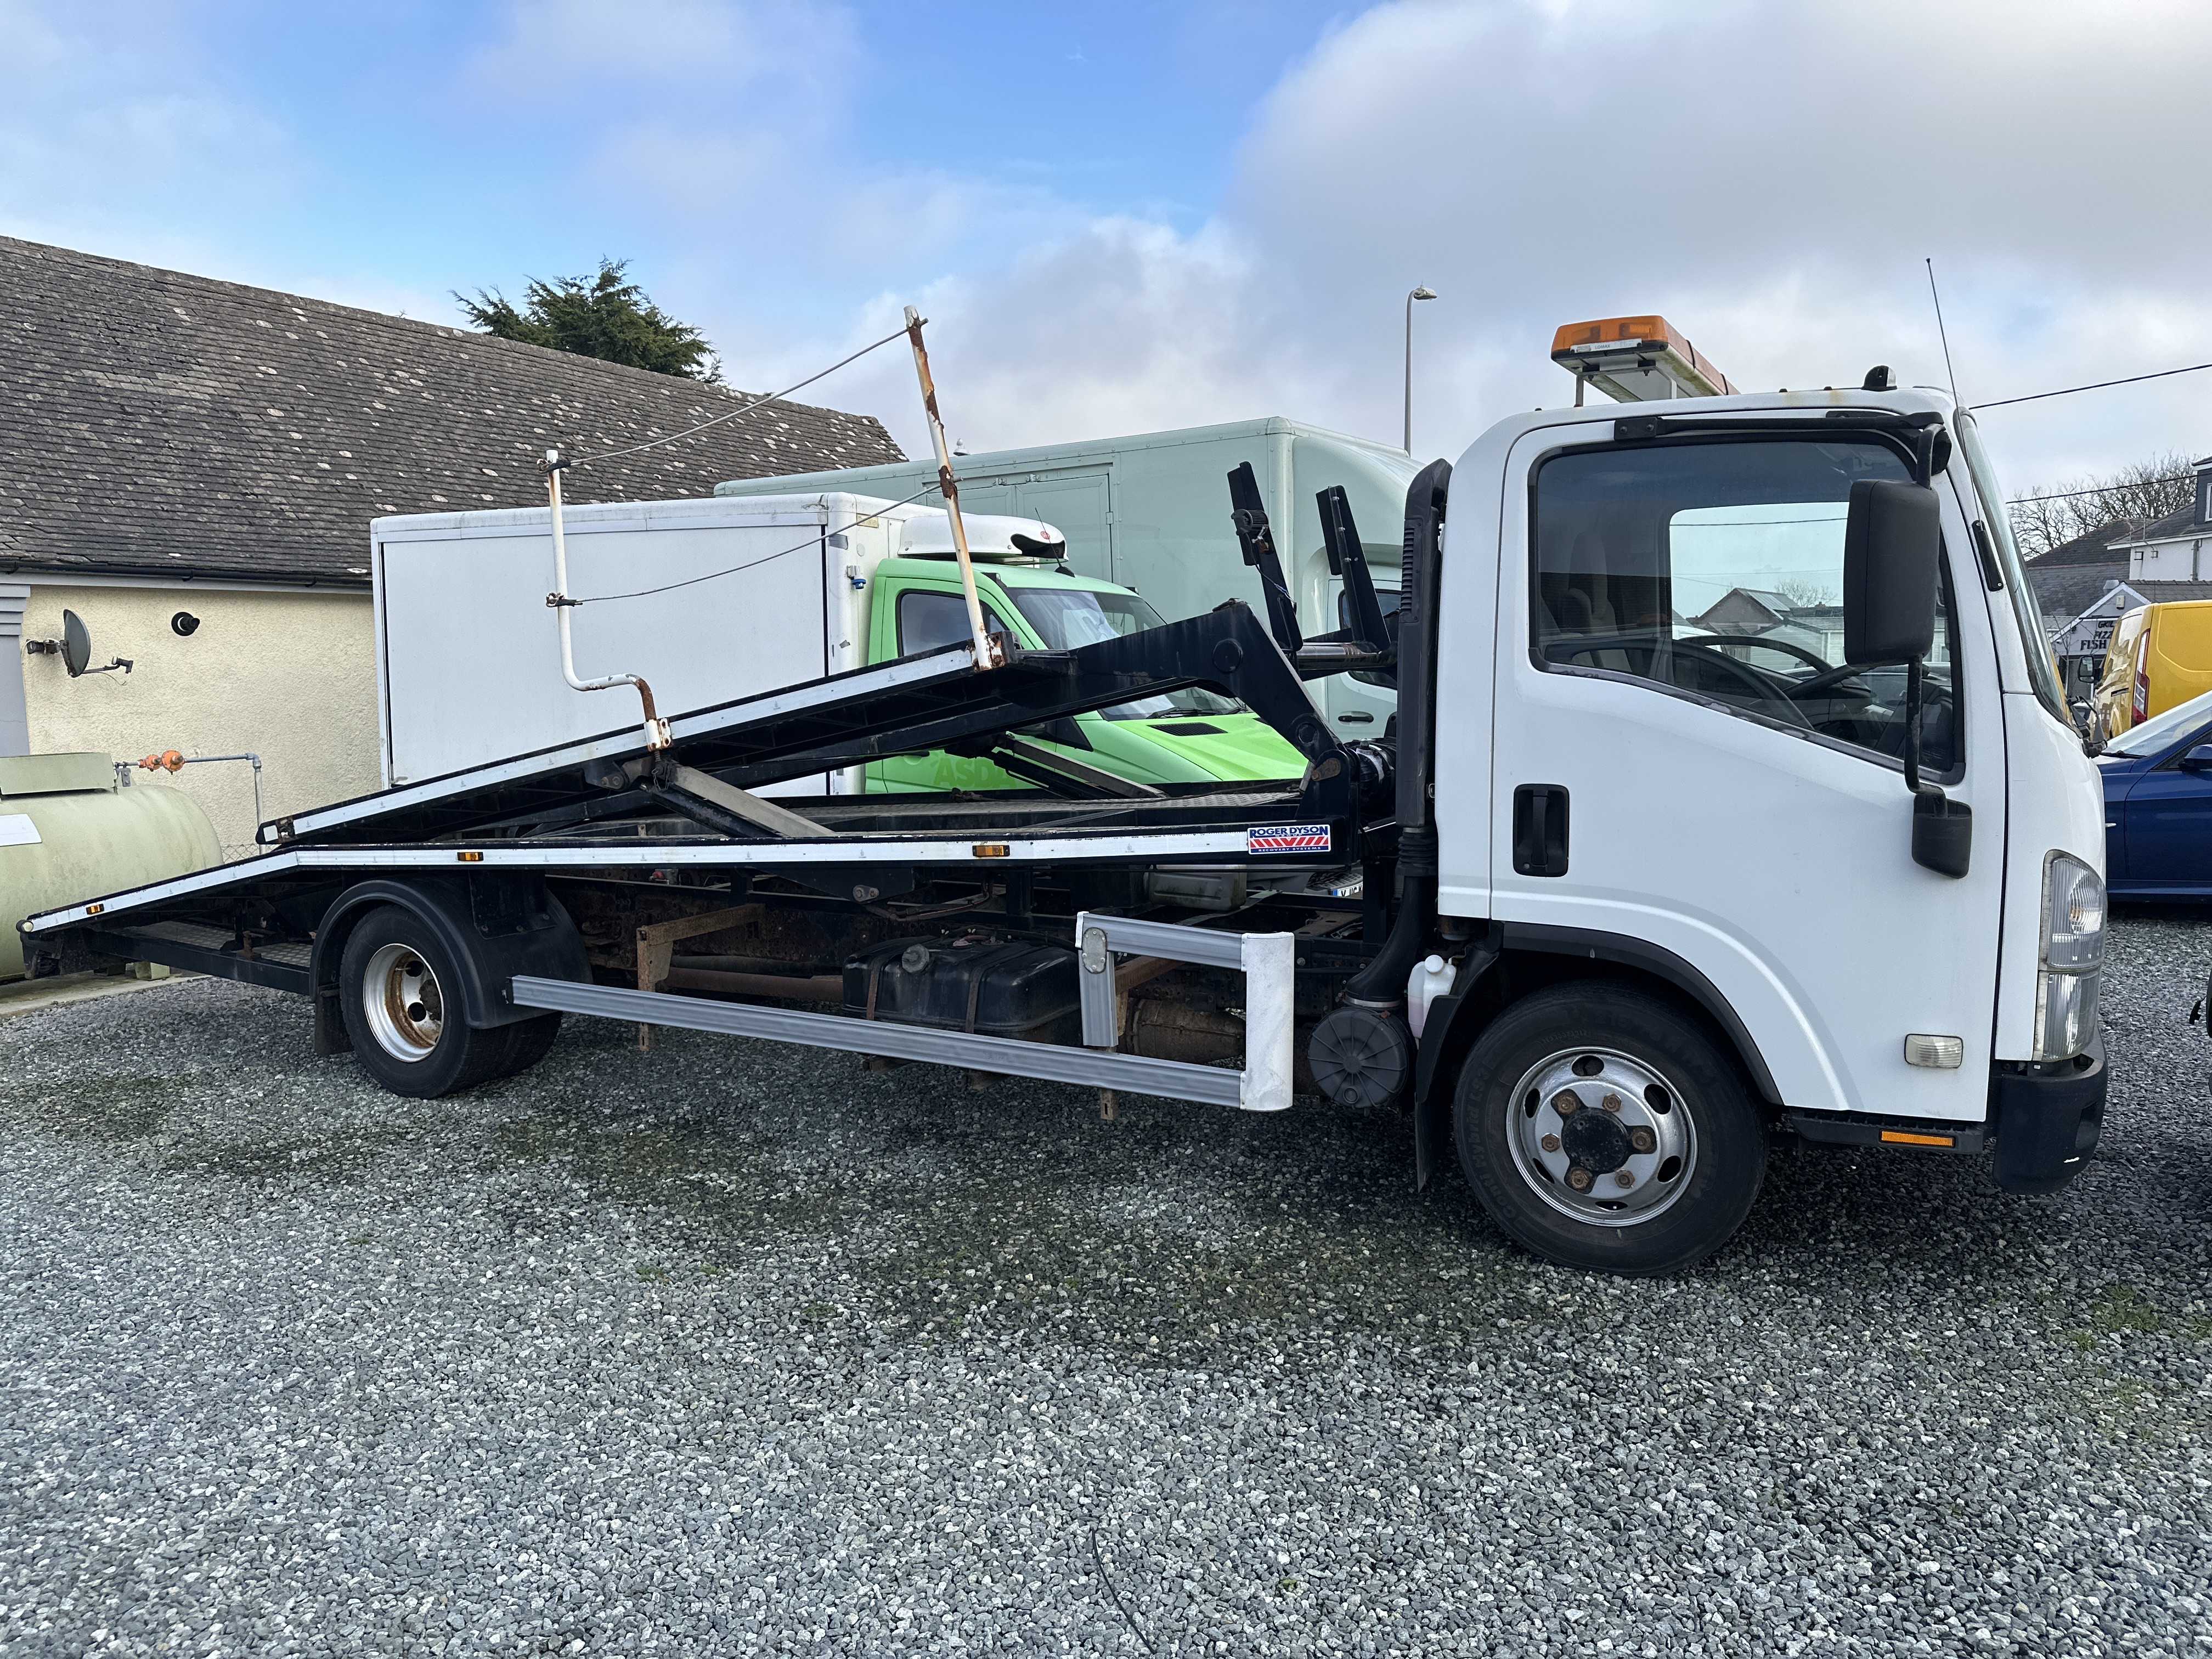  ISUZU TRUCK TWIN CAR TRANSPORTER for sale at Mike Howlin Motor Sales Pembrokeshire